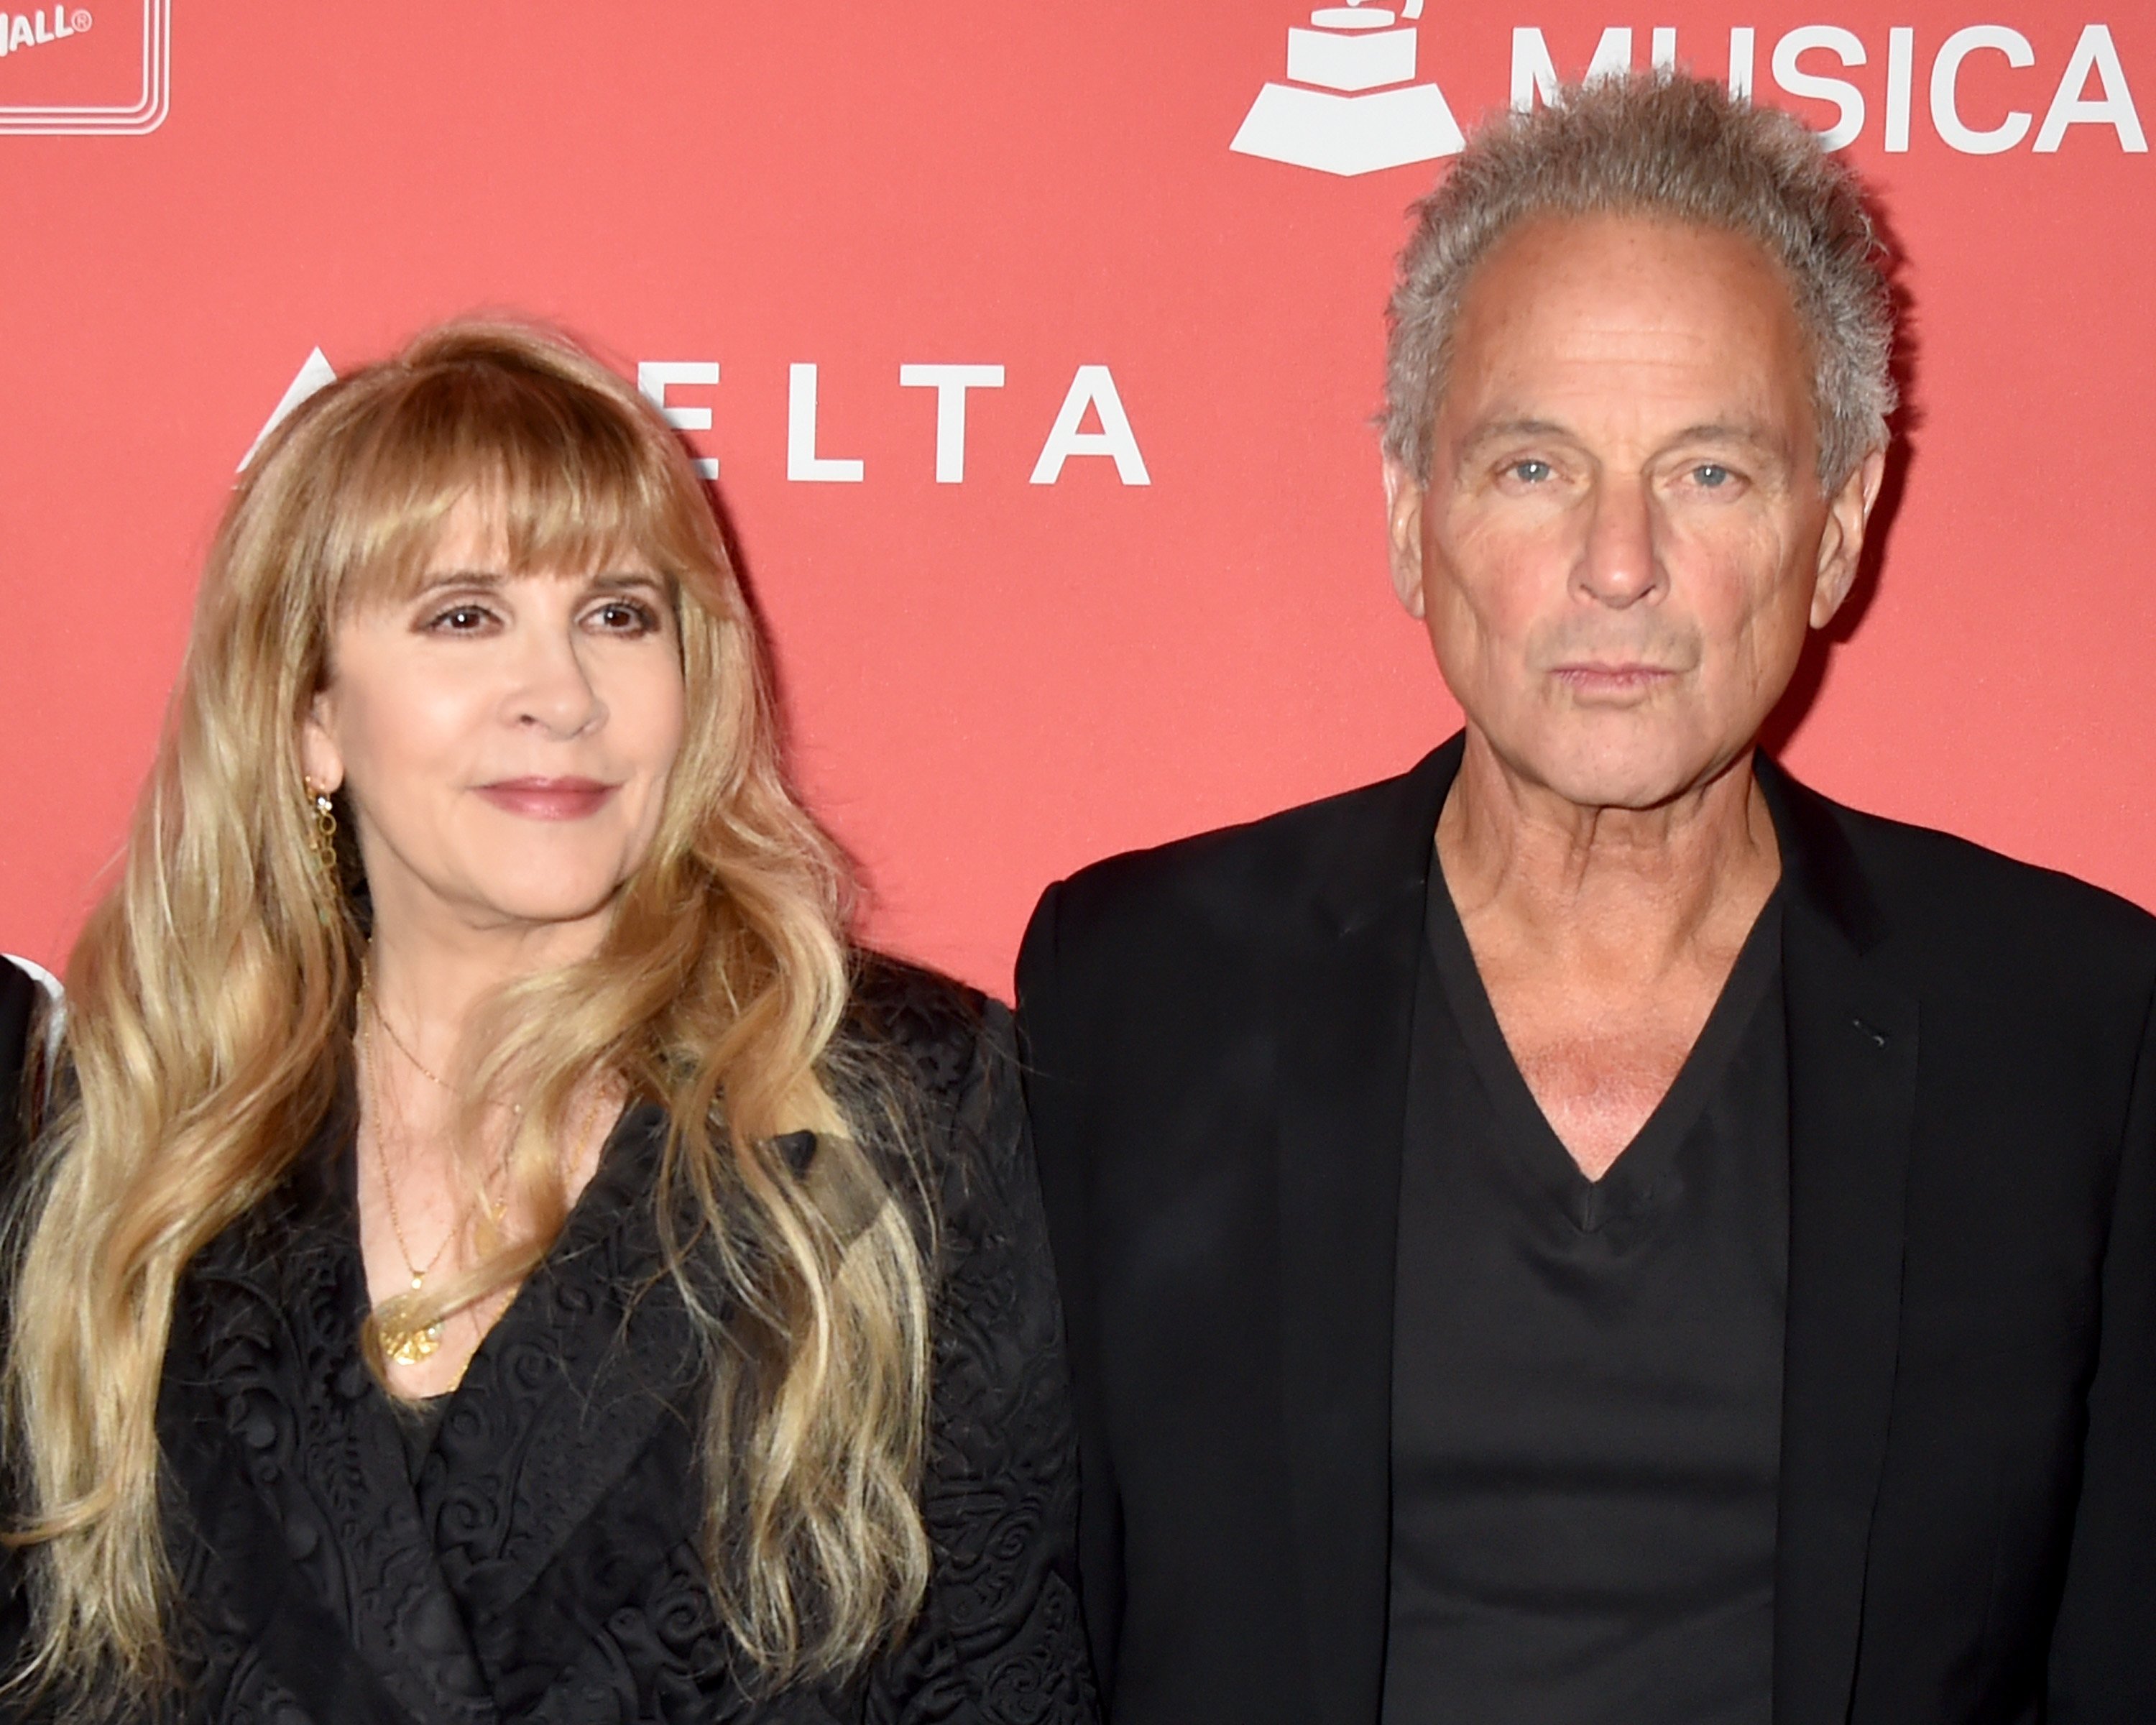 The Lines Stevie Nicks Removed From ‘Planets of the Universe’ About Her Break-up With Lindsey Buckingham